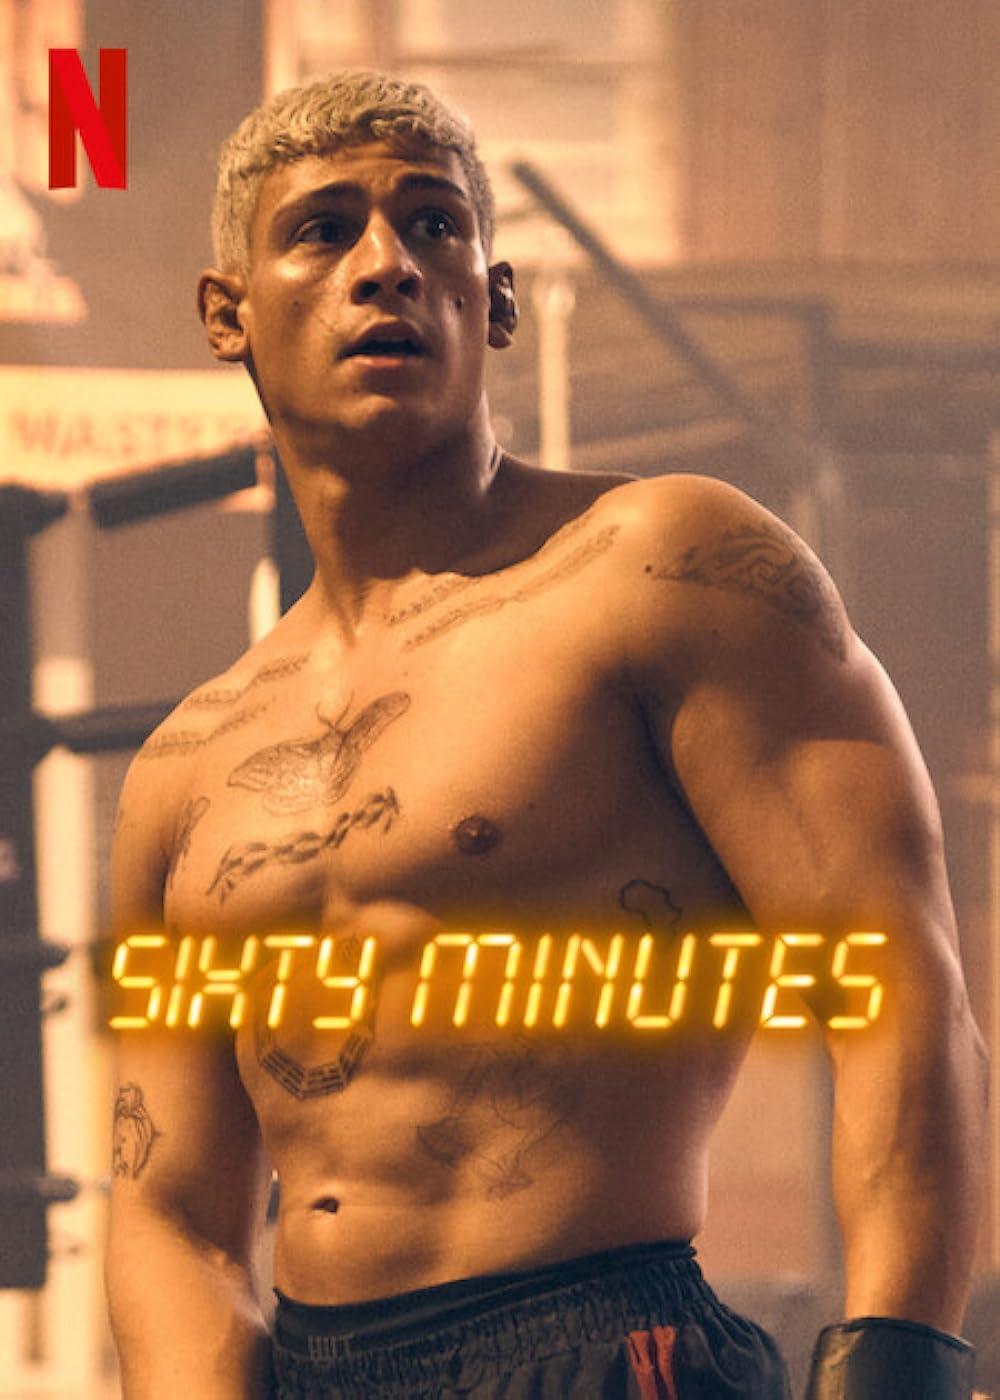 Sixty Minutes (January 19) - Streaming on NetflixSixty Minutes follows MMA fighter Octavio “Ox” Rodriguez facing a tough choice: attend his daughter’s birthday party or lose custody forever. His decision triggers a chain of events involving the MMA underworld’s dangerous figures, setting off a tense race against time. The film weaves through personal struggles, sacrifices, and the gritty world of mixed martial arts.